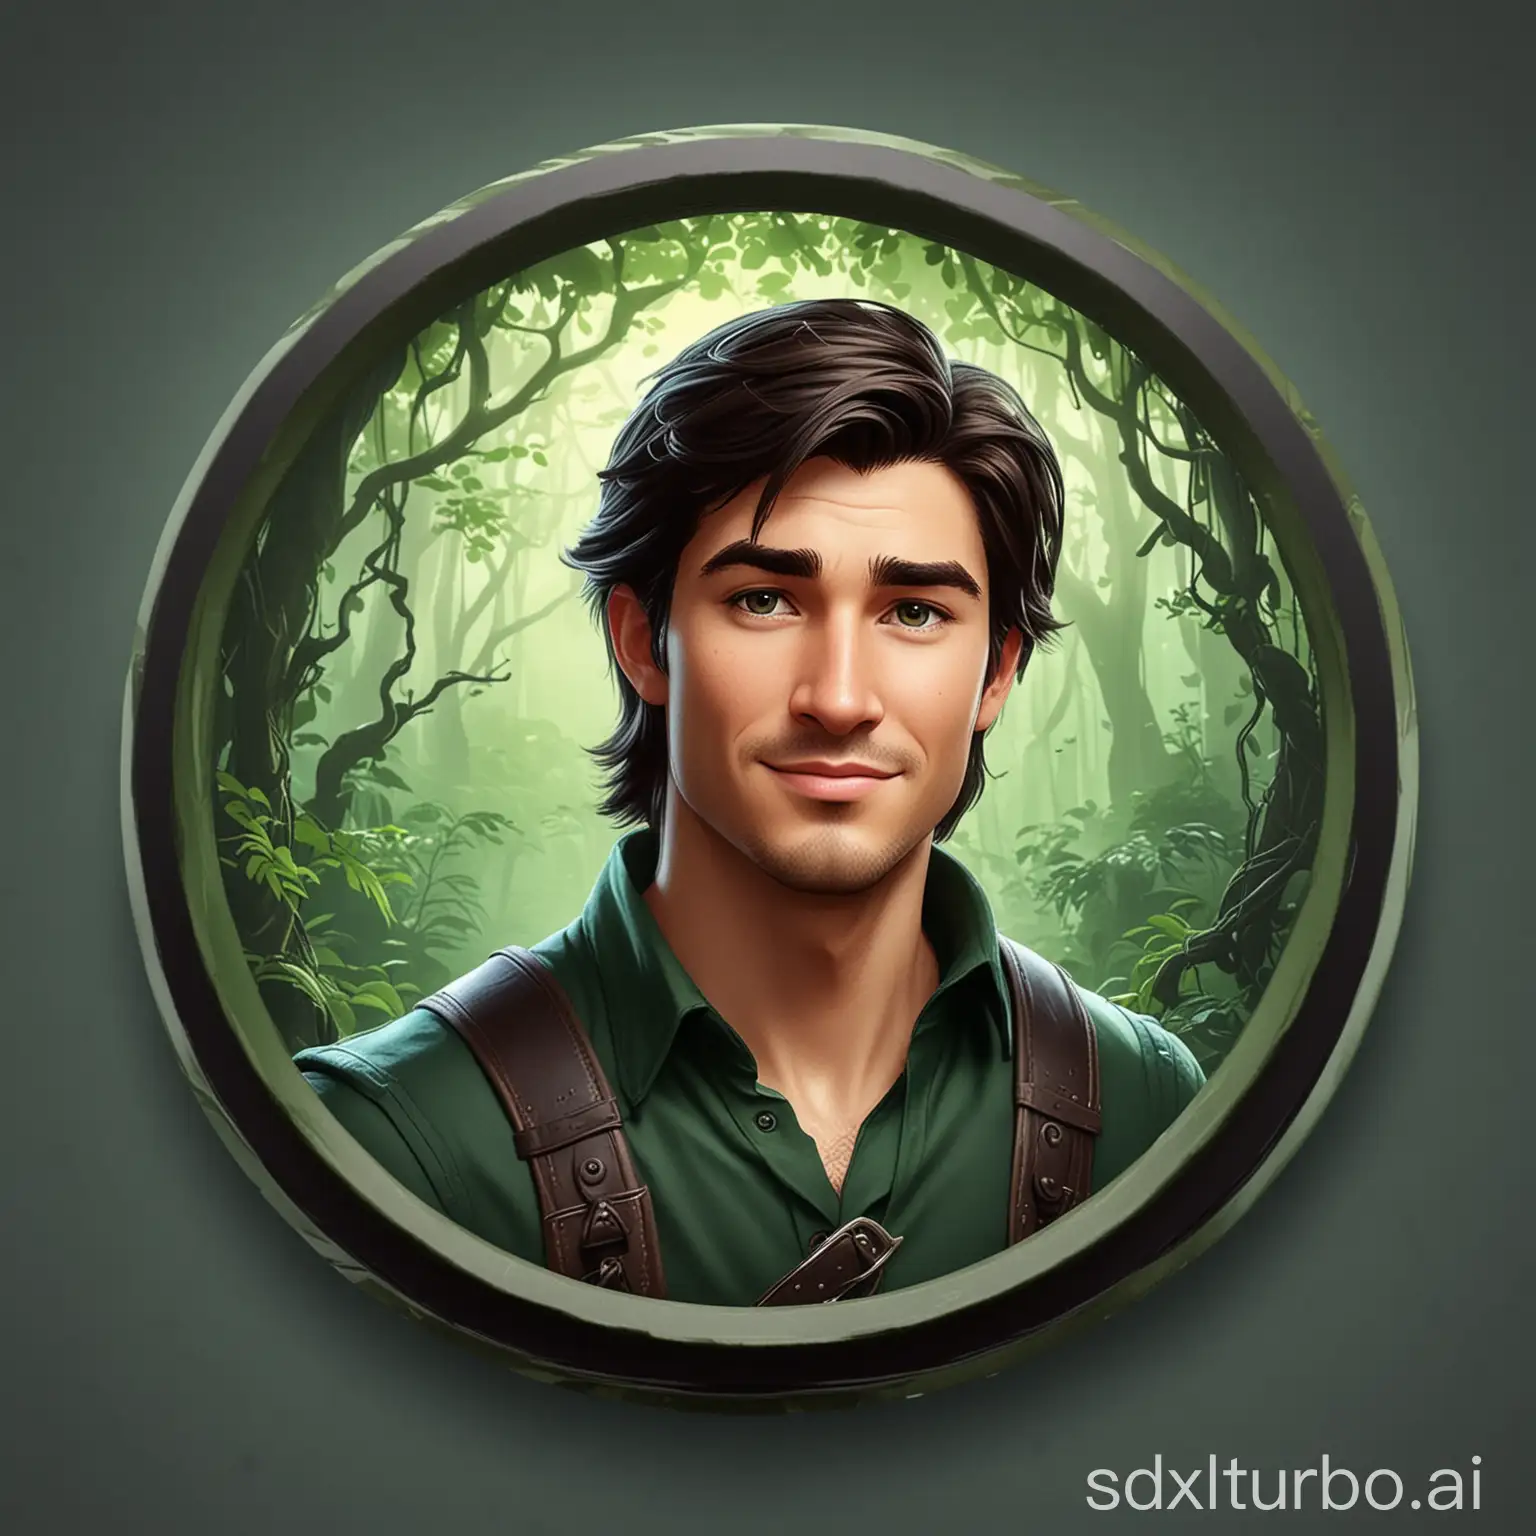 rounded avatar game badge for male, green and black colors, tangled, Flynn Rider, sloied background